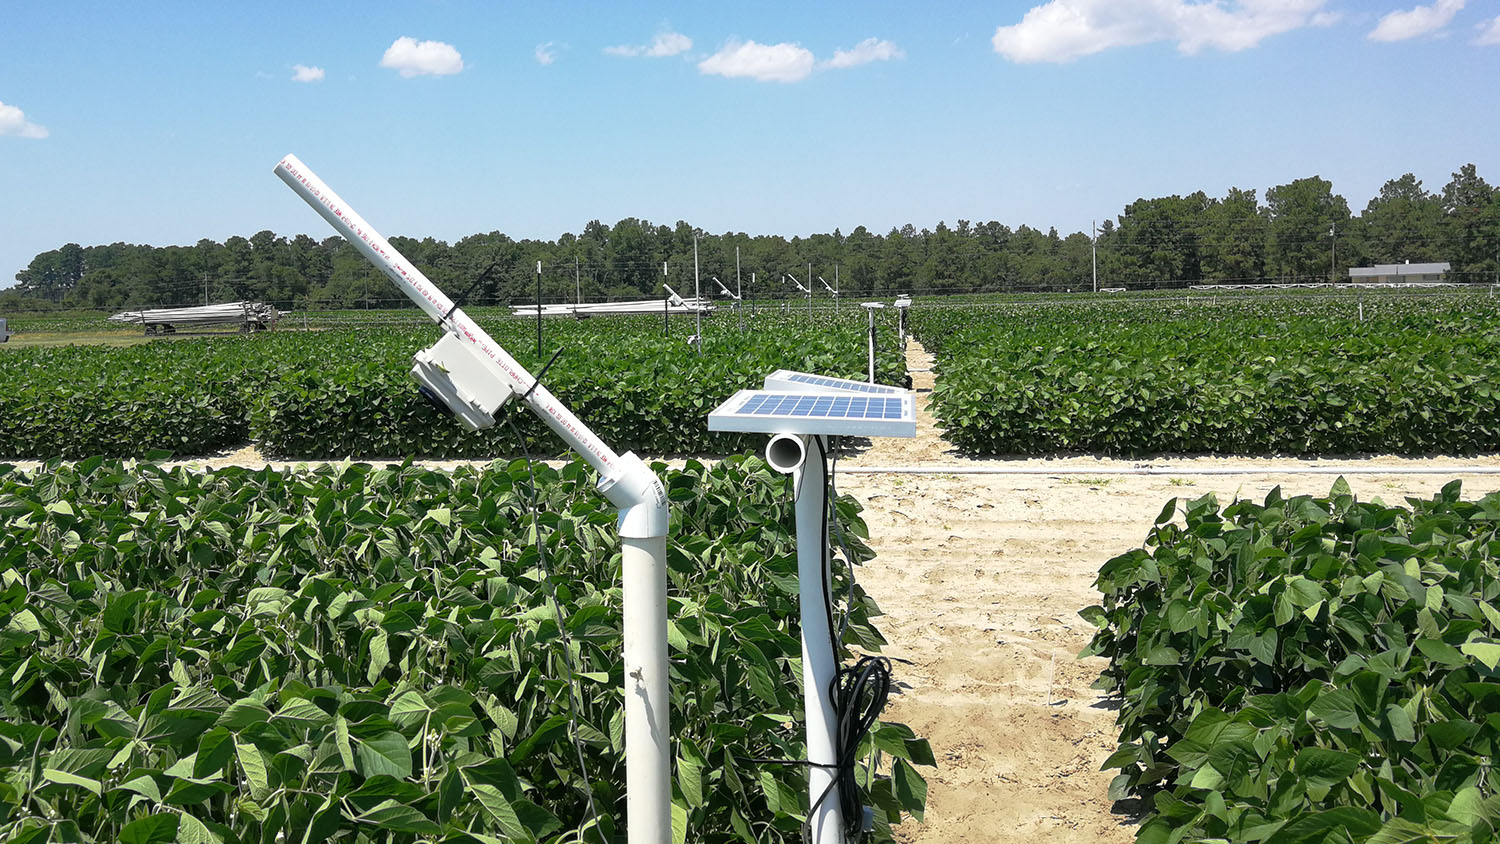 A StressCam, a low-cost camera system to monitor crop stress, over a field of soybeans at the Sandhills Research Station.